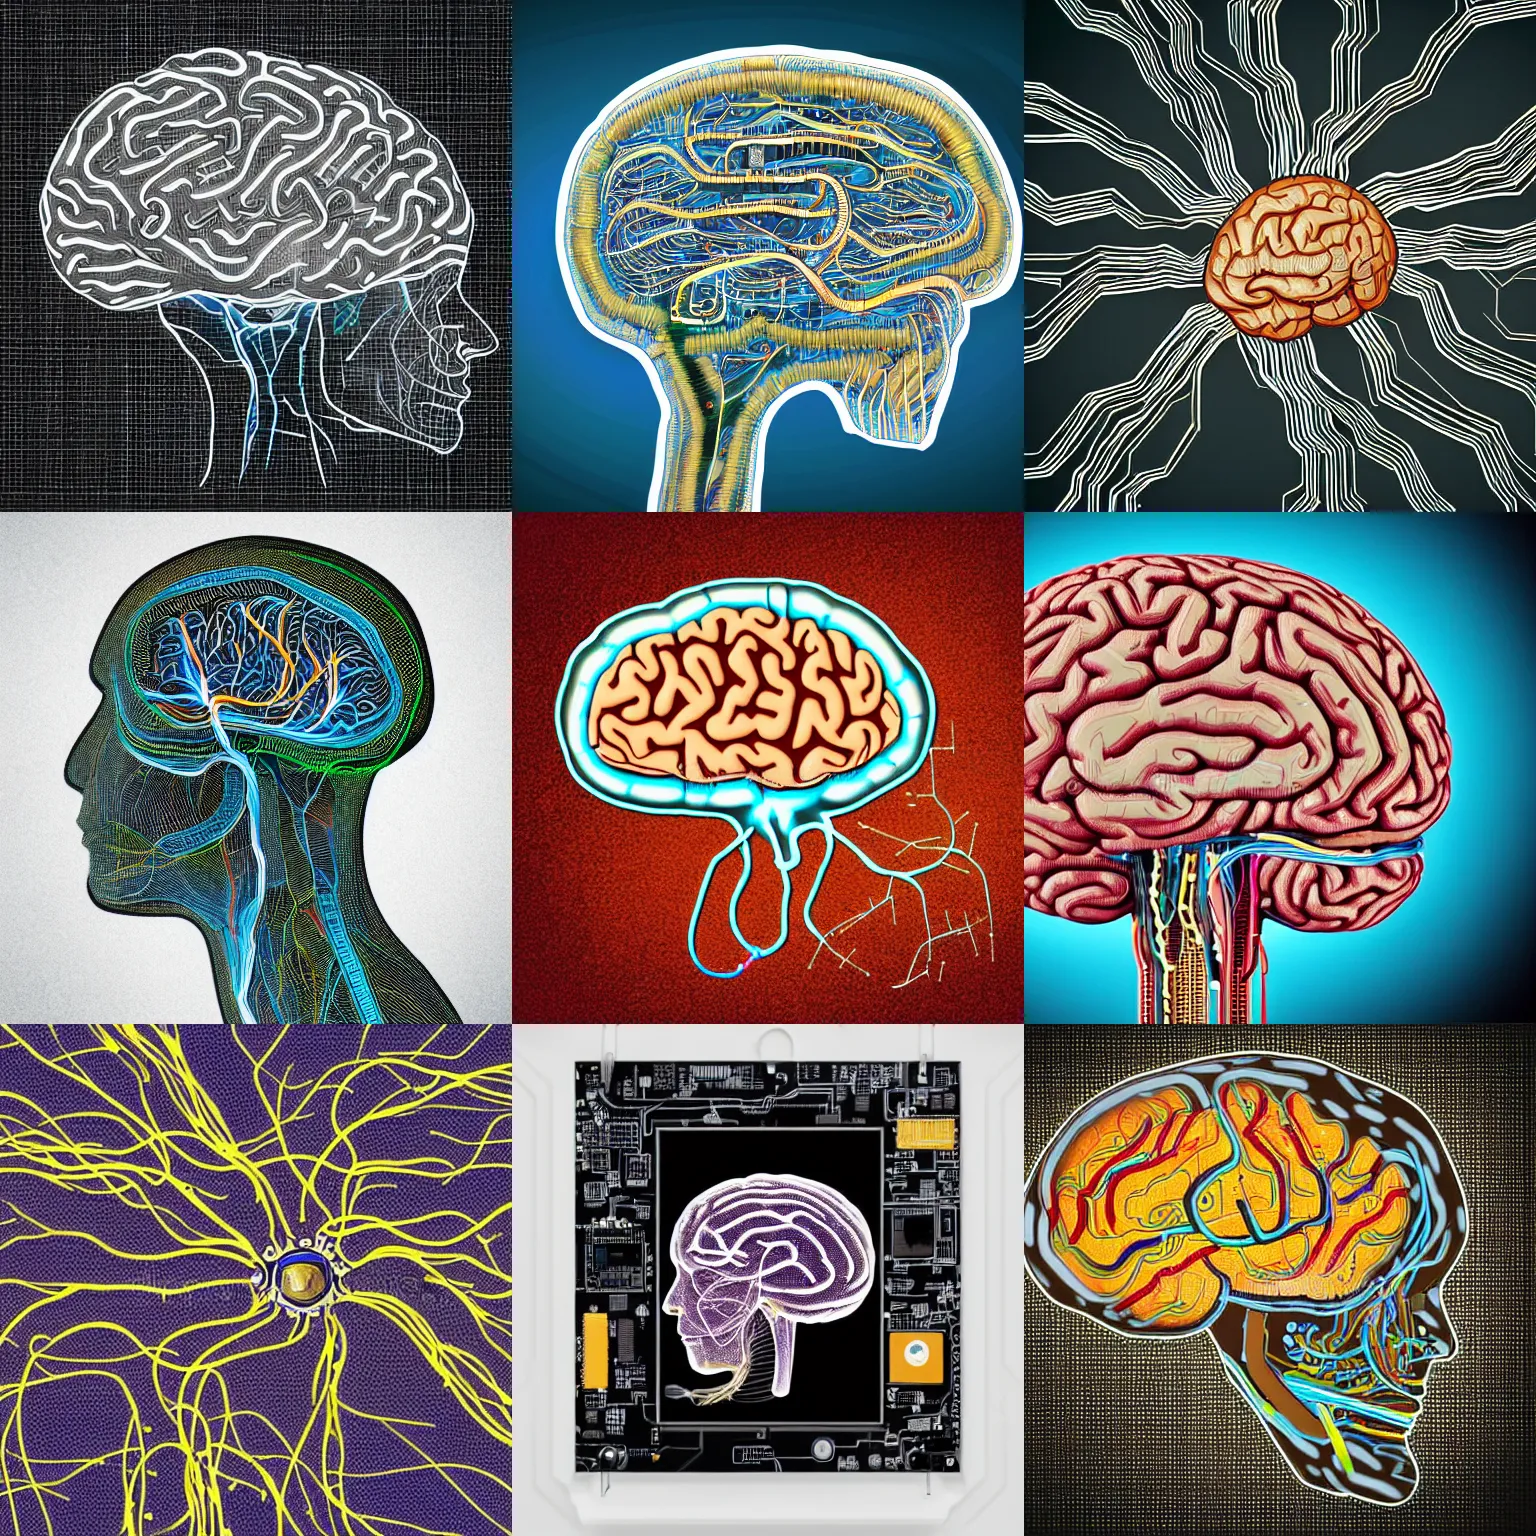 Prompt: human brain, integrated circuit, neurons and synapses, printed circuit board, electrical signals, detailed, realistic, in style of digital illustration